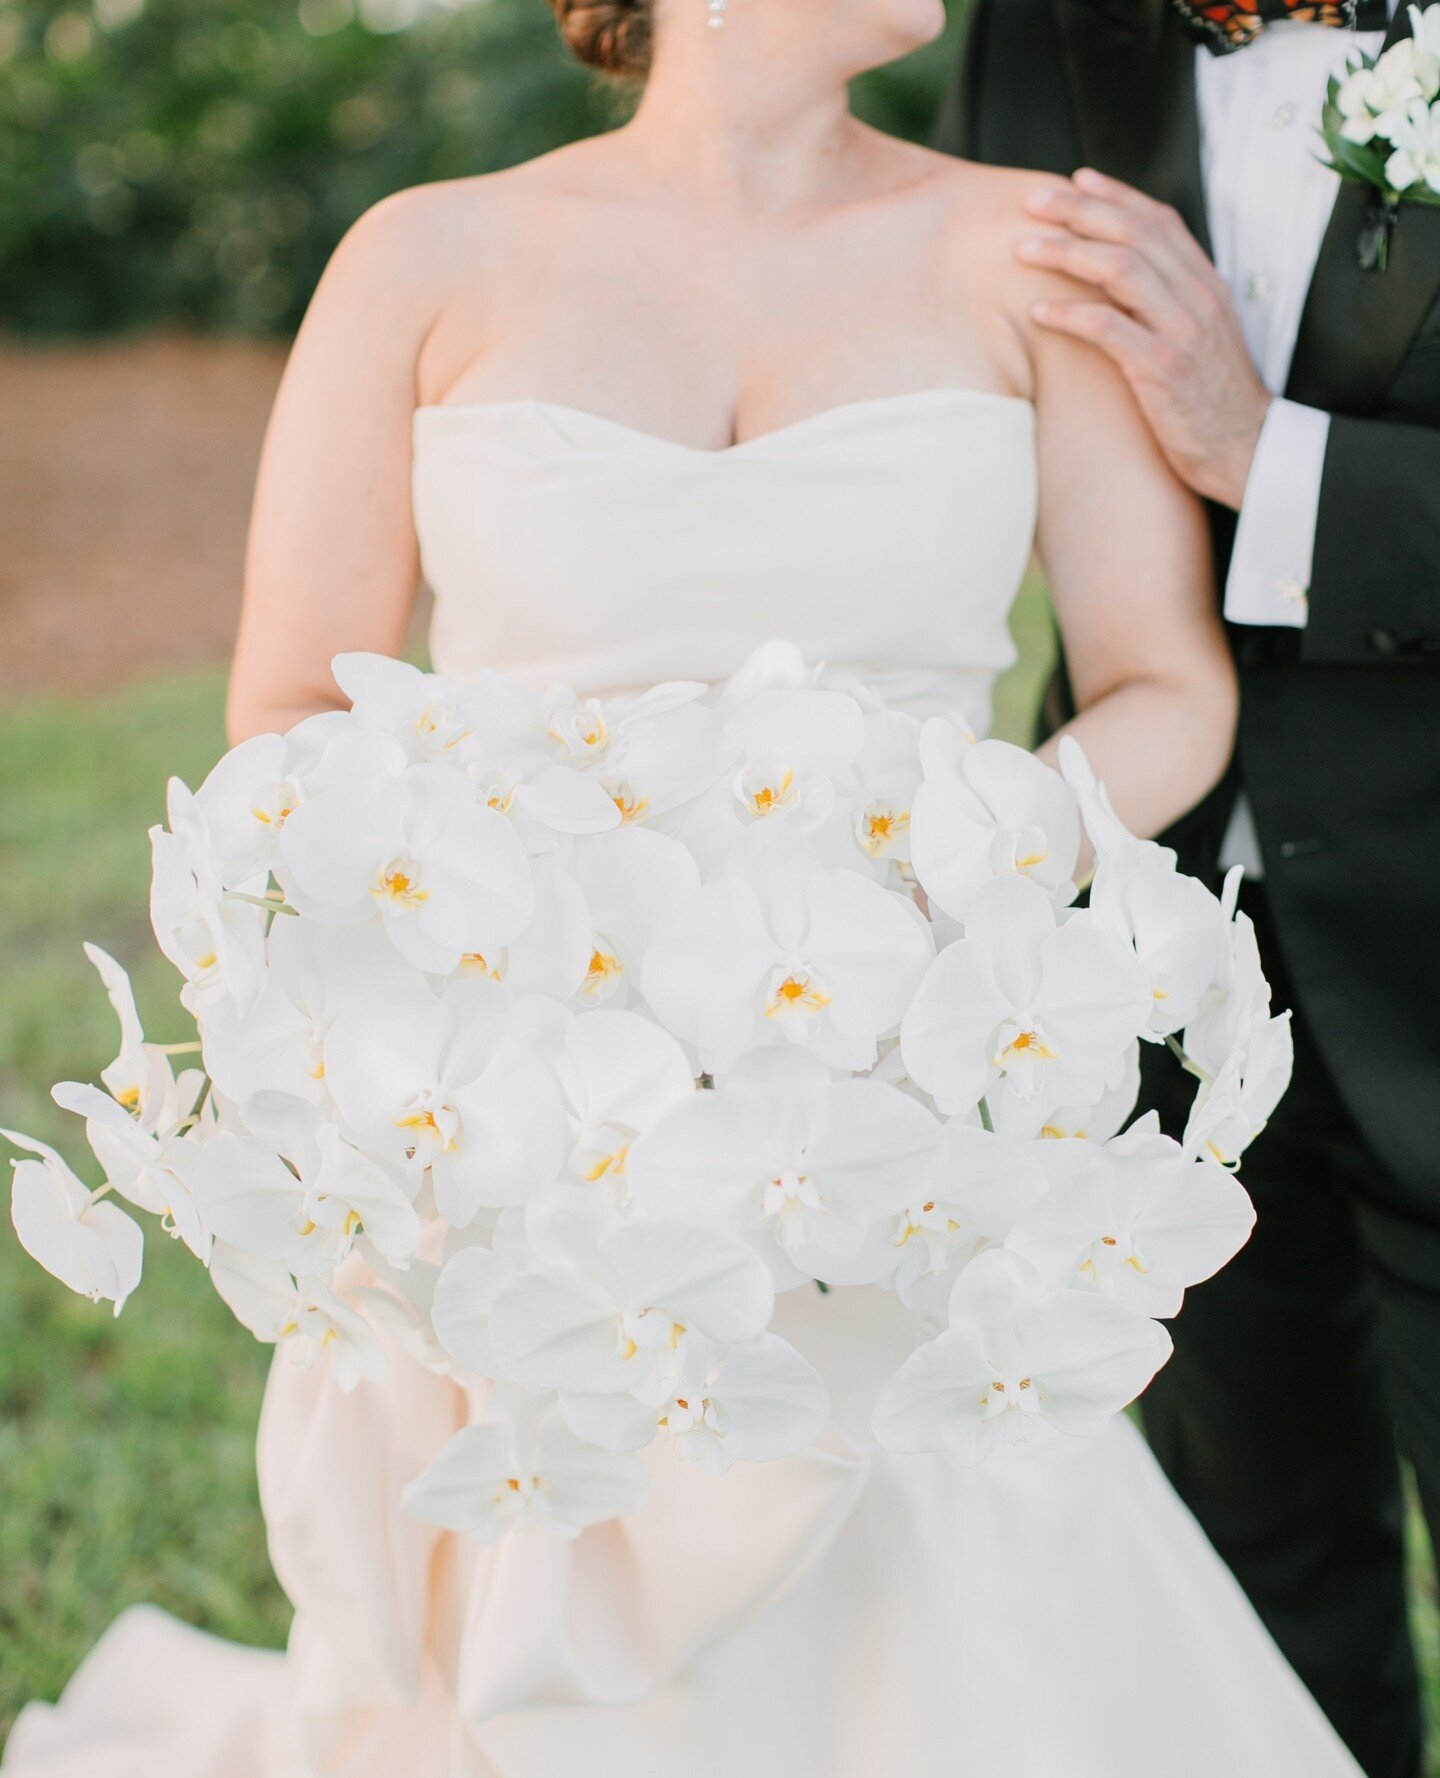 Do You Love Orchids?✨⁠
⁠
We do! White Phalaenopsis Orchids make for the perfect timeless modern design! Swipe to see orchids in action!⁠
⁠
Double tap and comment to show your love!⁠
-⁠
-⁠
-⁠
⁠
⁠
#orlandowedding #orlandoflorist #orlandoweddingflowers 